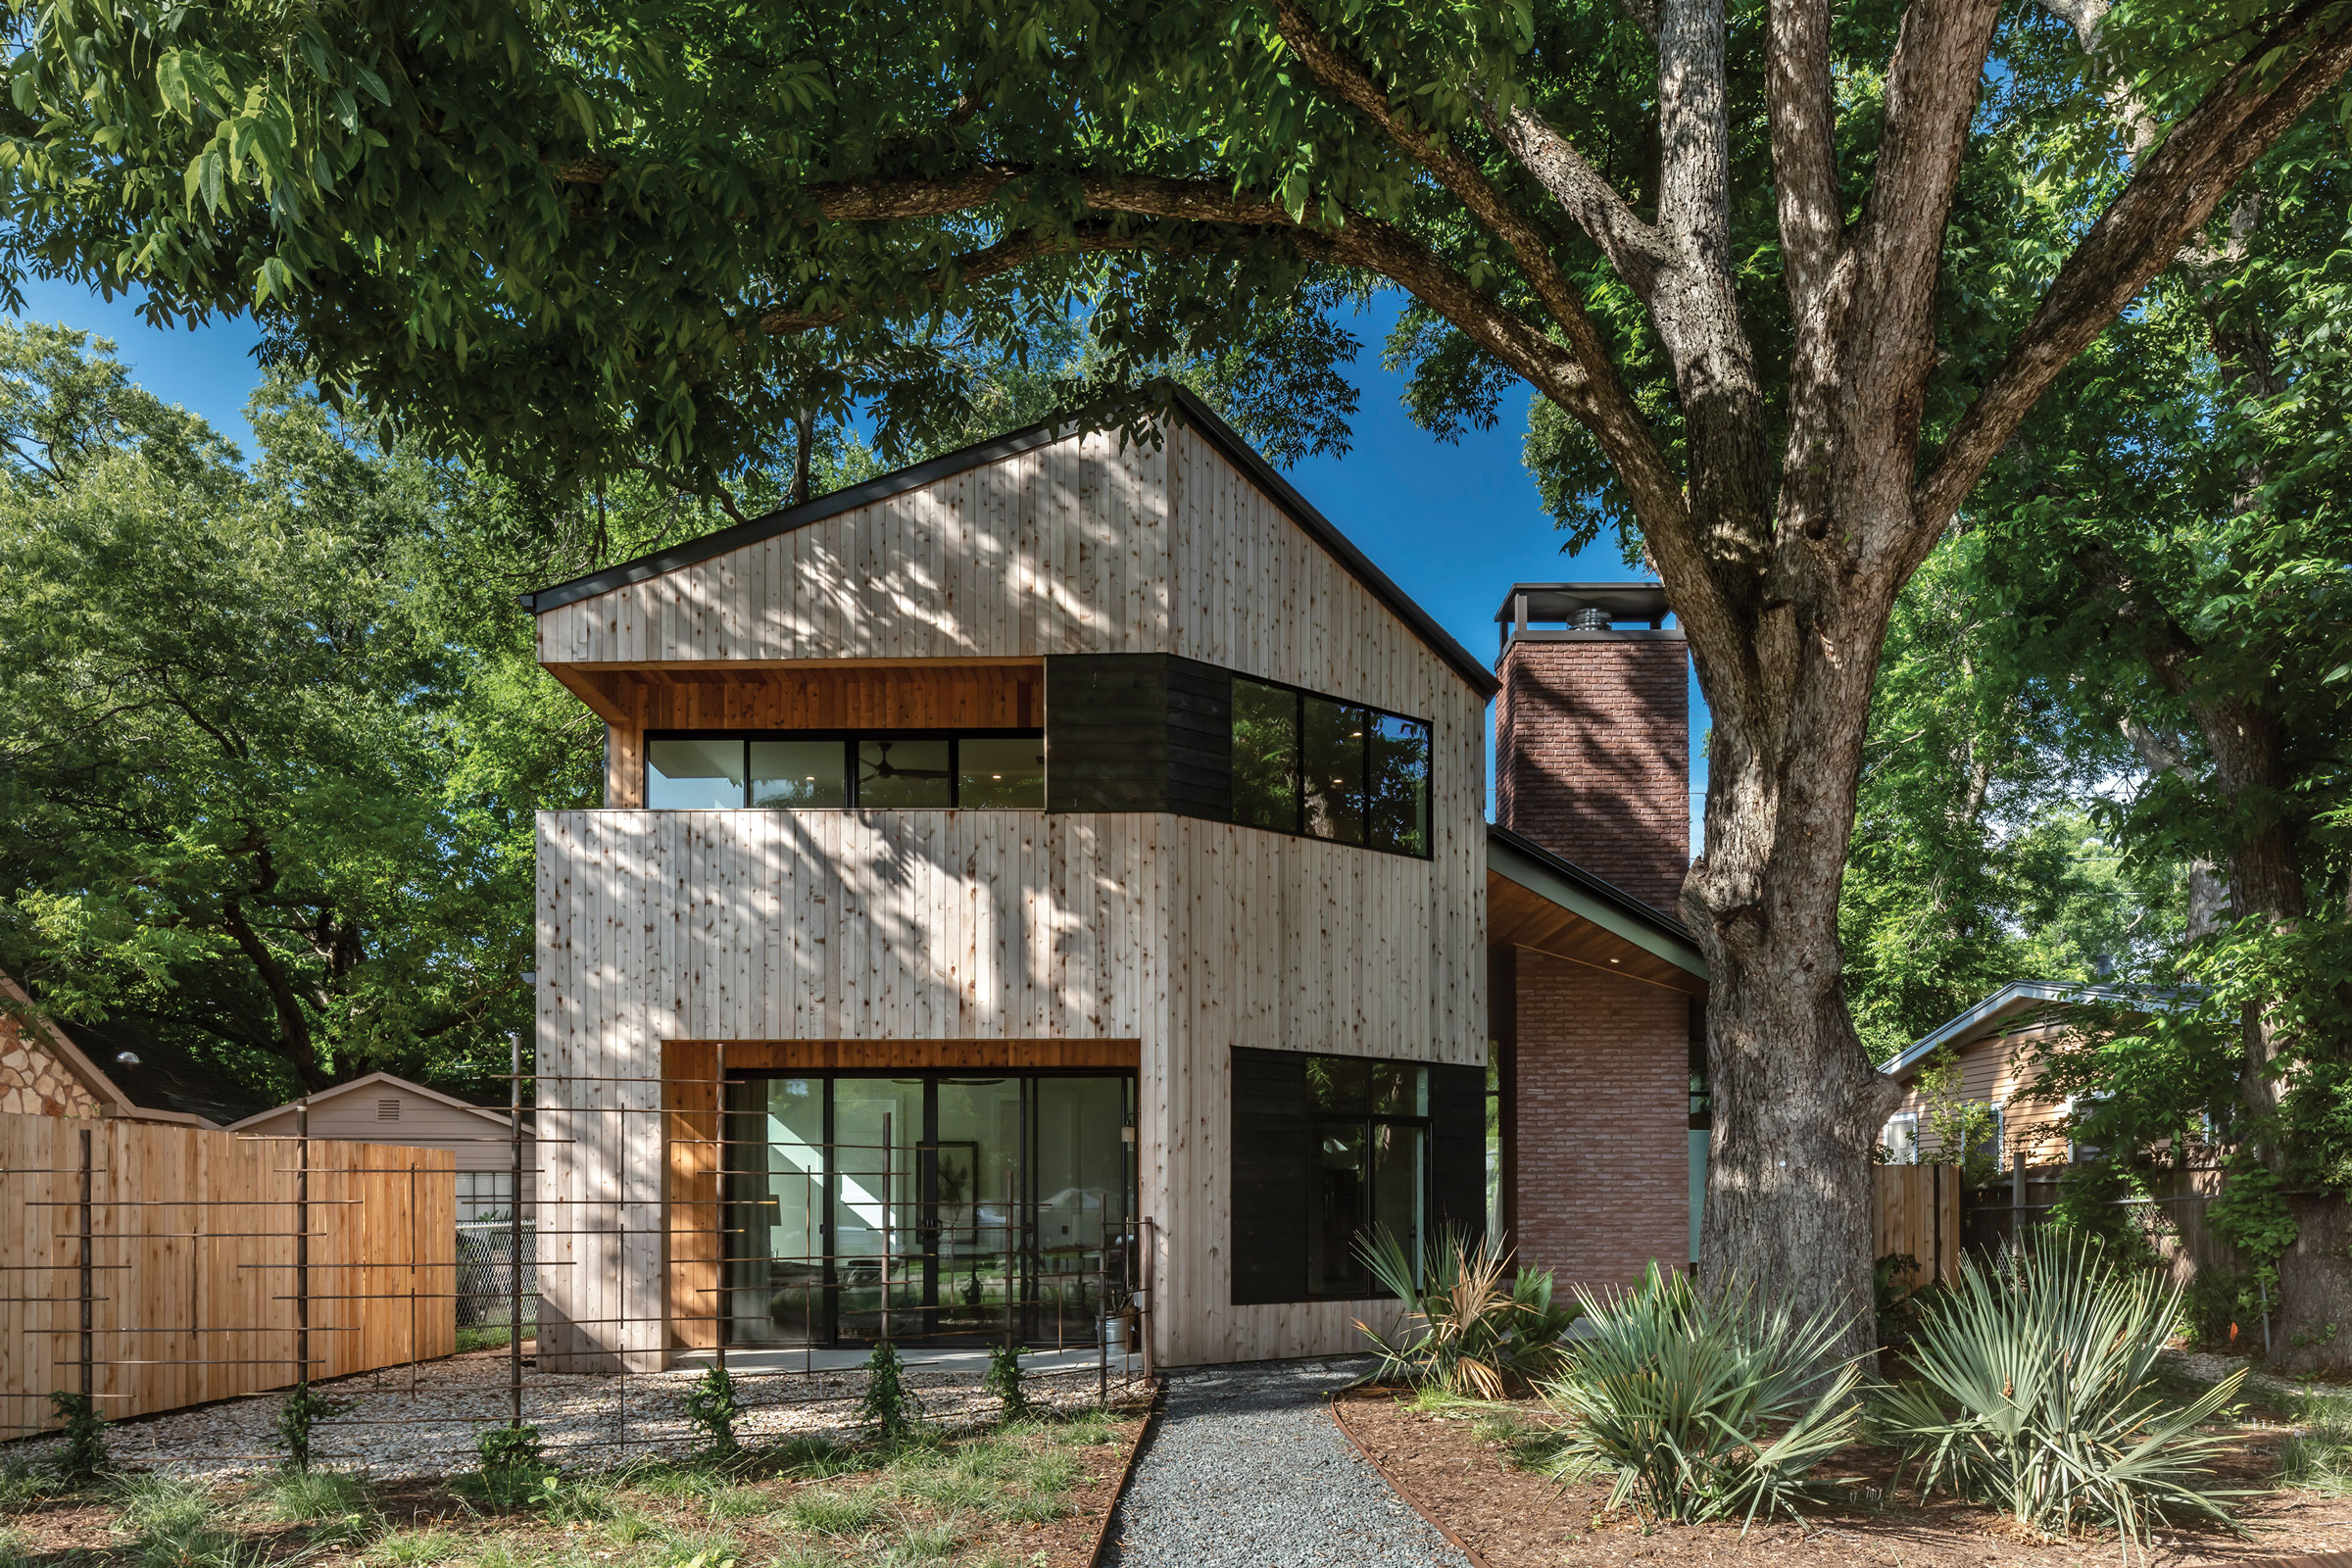 Hewn House is a Modern, Cabin-Inspired Stunner